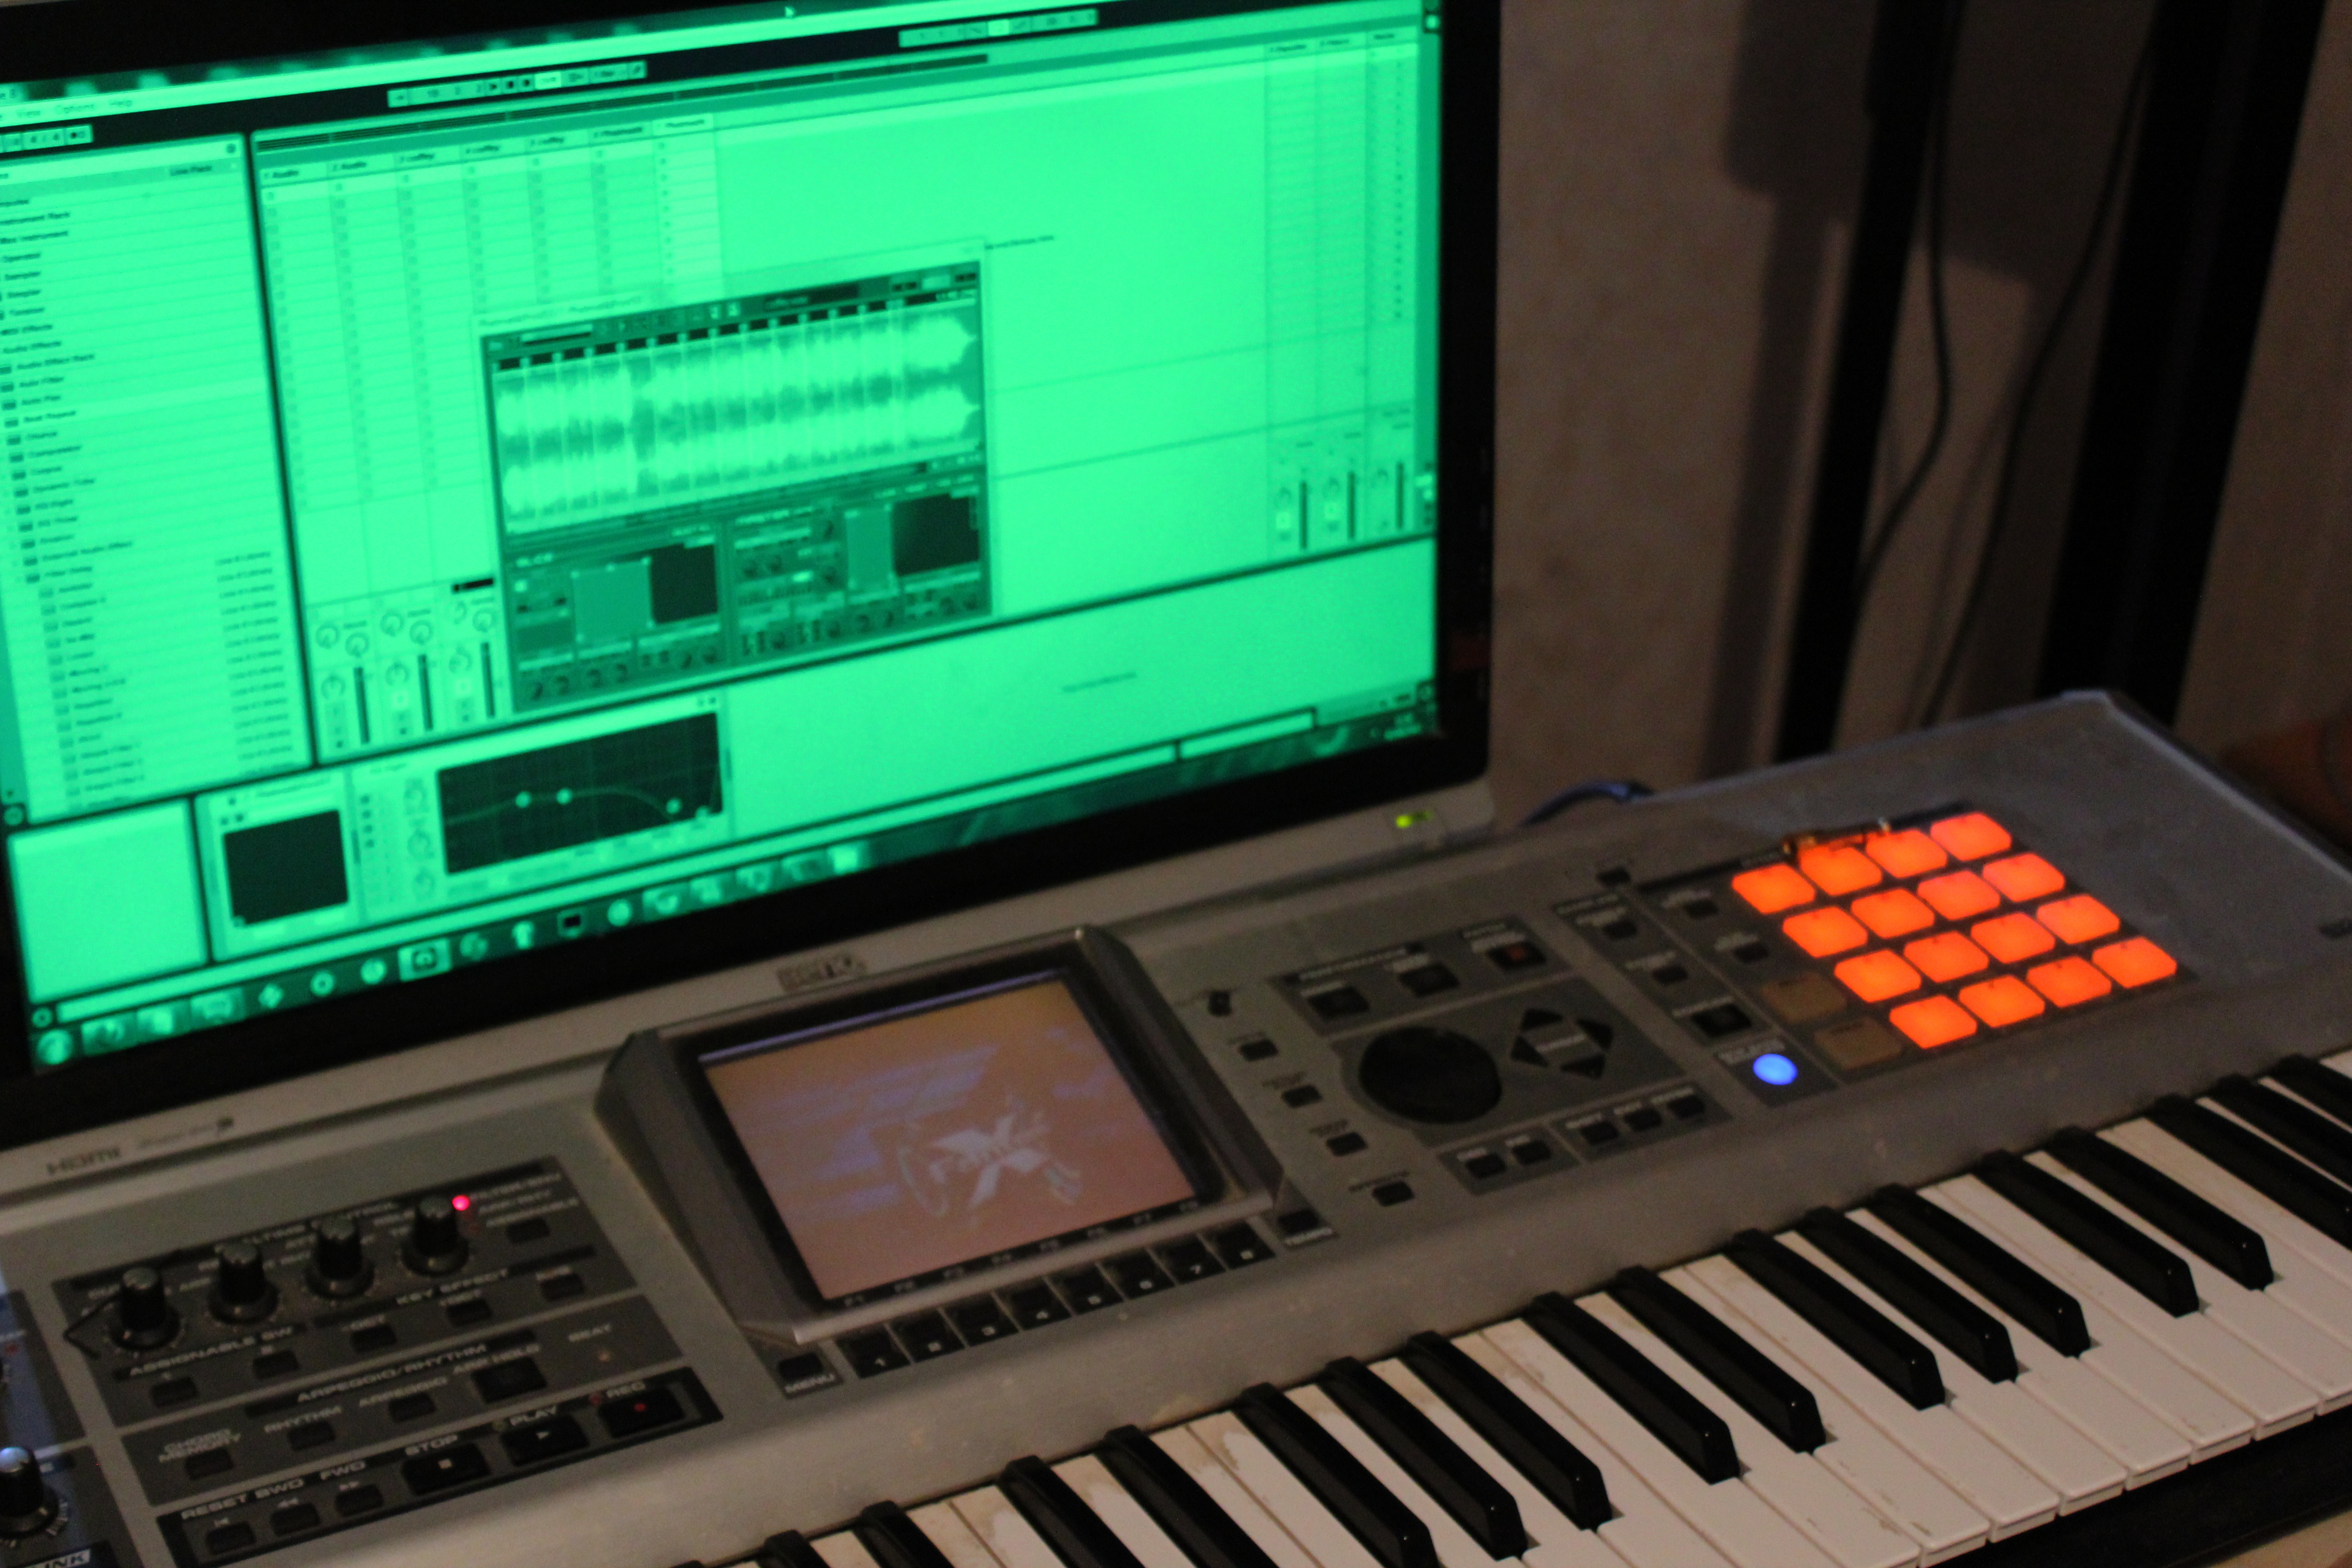 File:Roland Fantom X6 Keyboard and Software Editing (on green